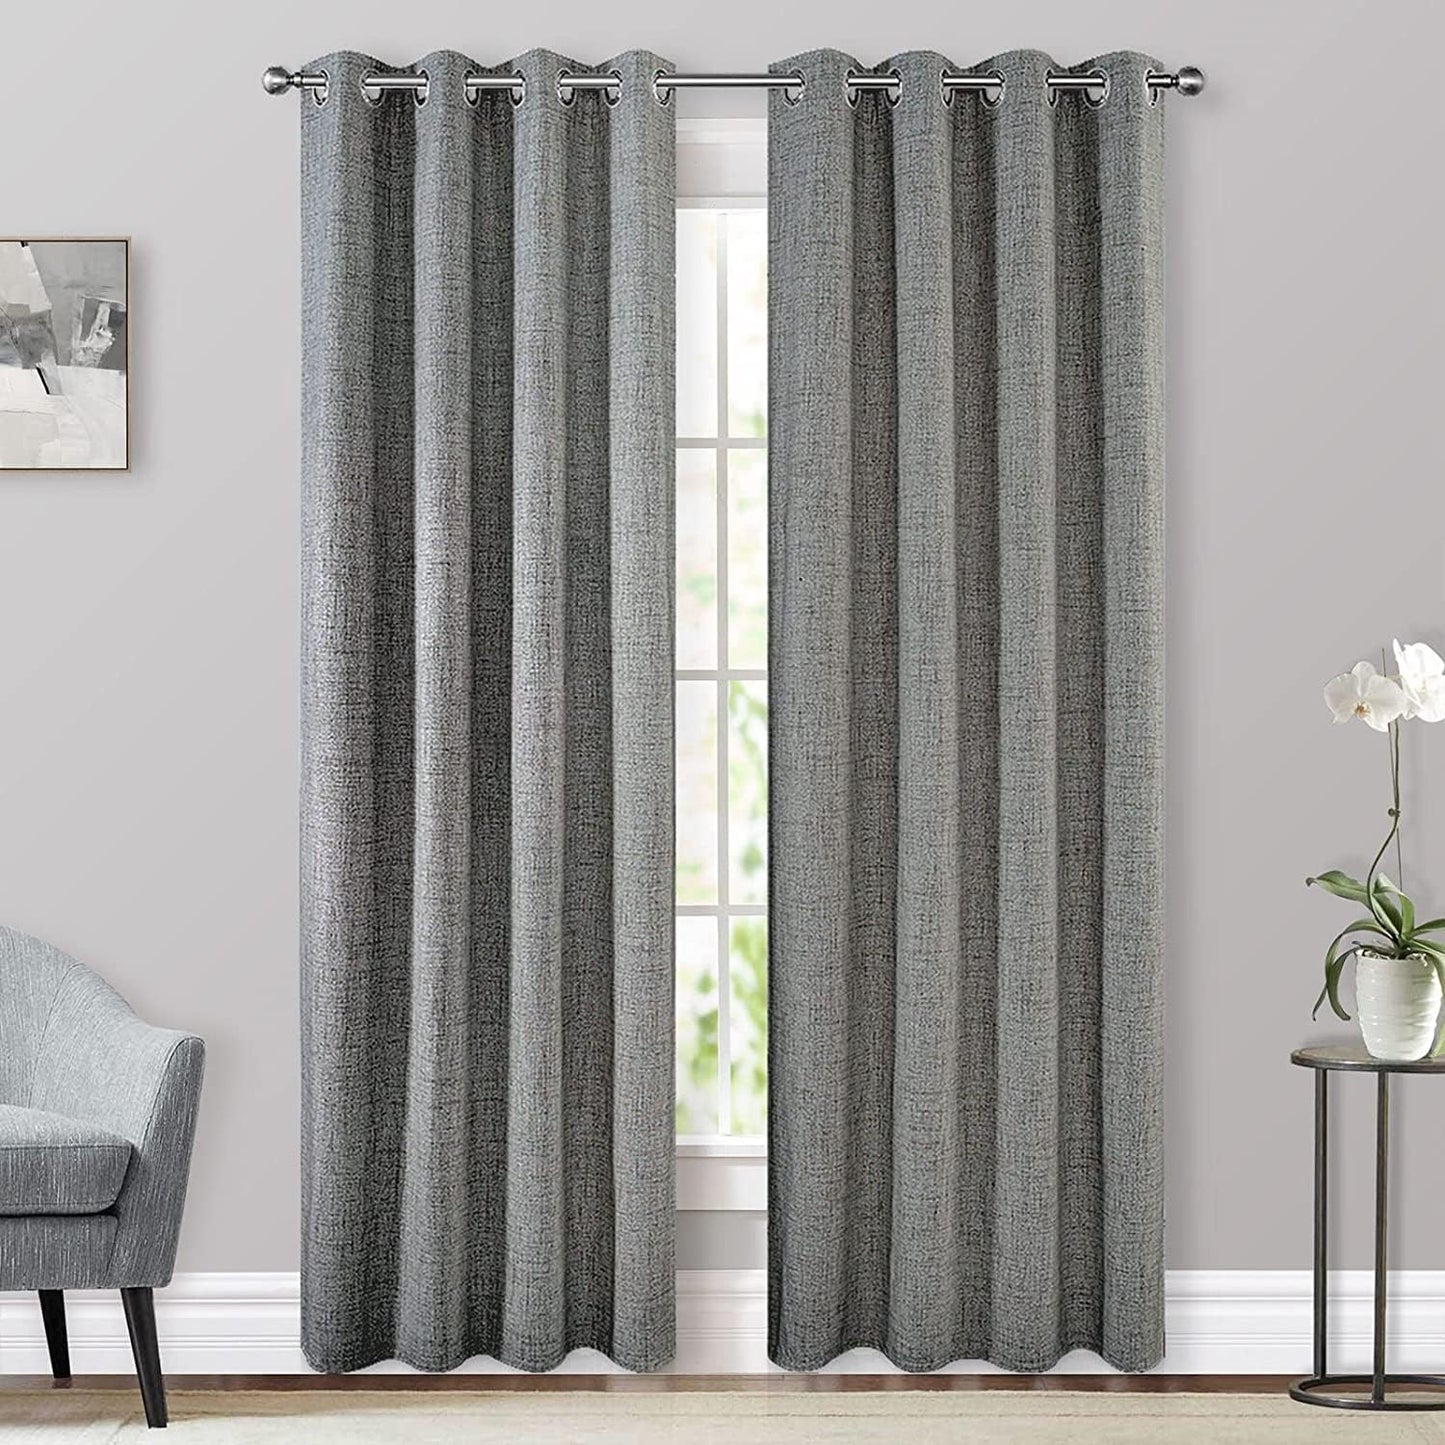 CUCRAF Full Blackout Window Curtains 84 Inches Long,Faux Linen Look Thermal Insulated Grommet Drapes Panels for Bedroom Living Room,Set of 2(52 X 84 Inches, Light Khaki)  CUCRAF Light Grey 52 X 108 Inches 